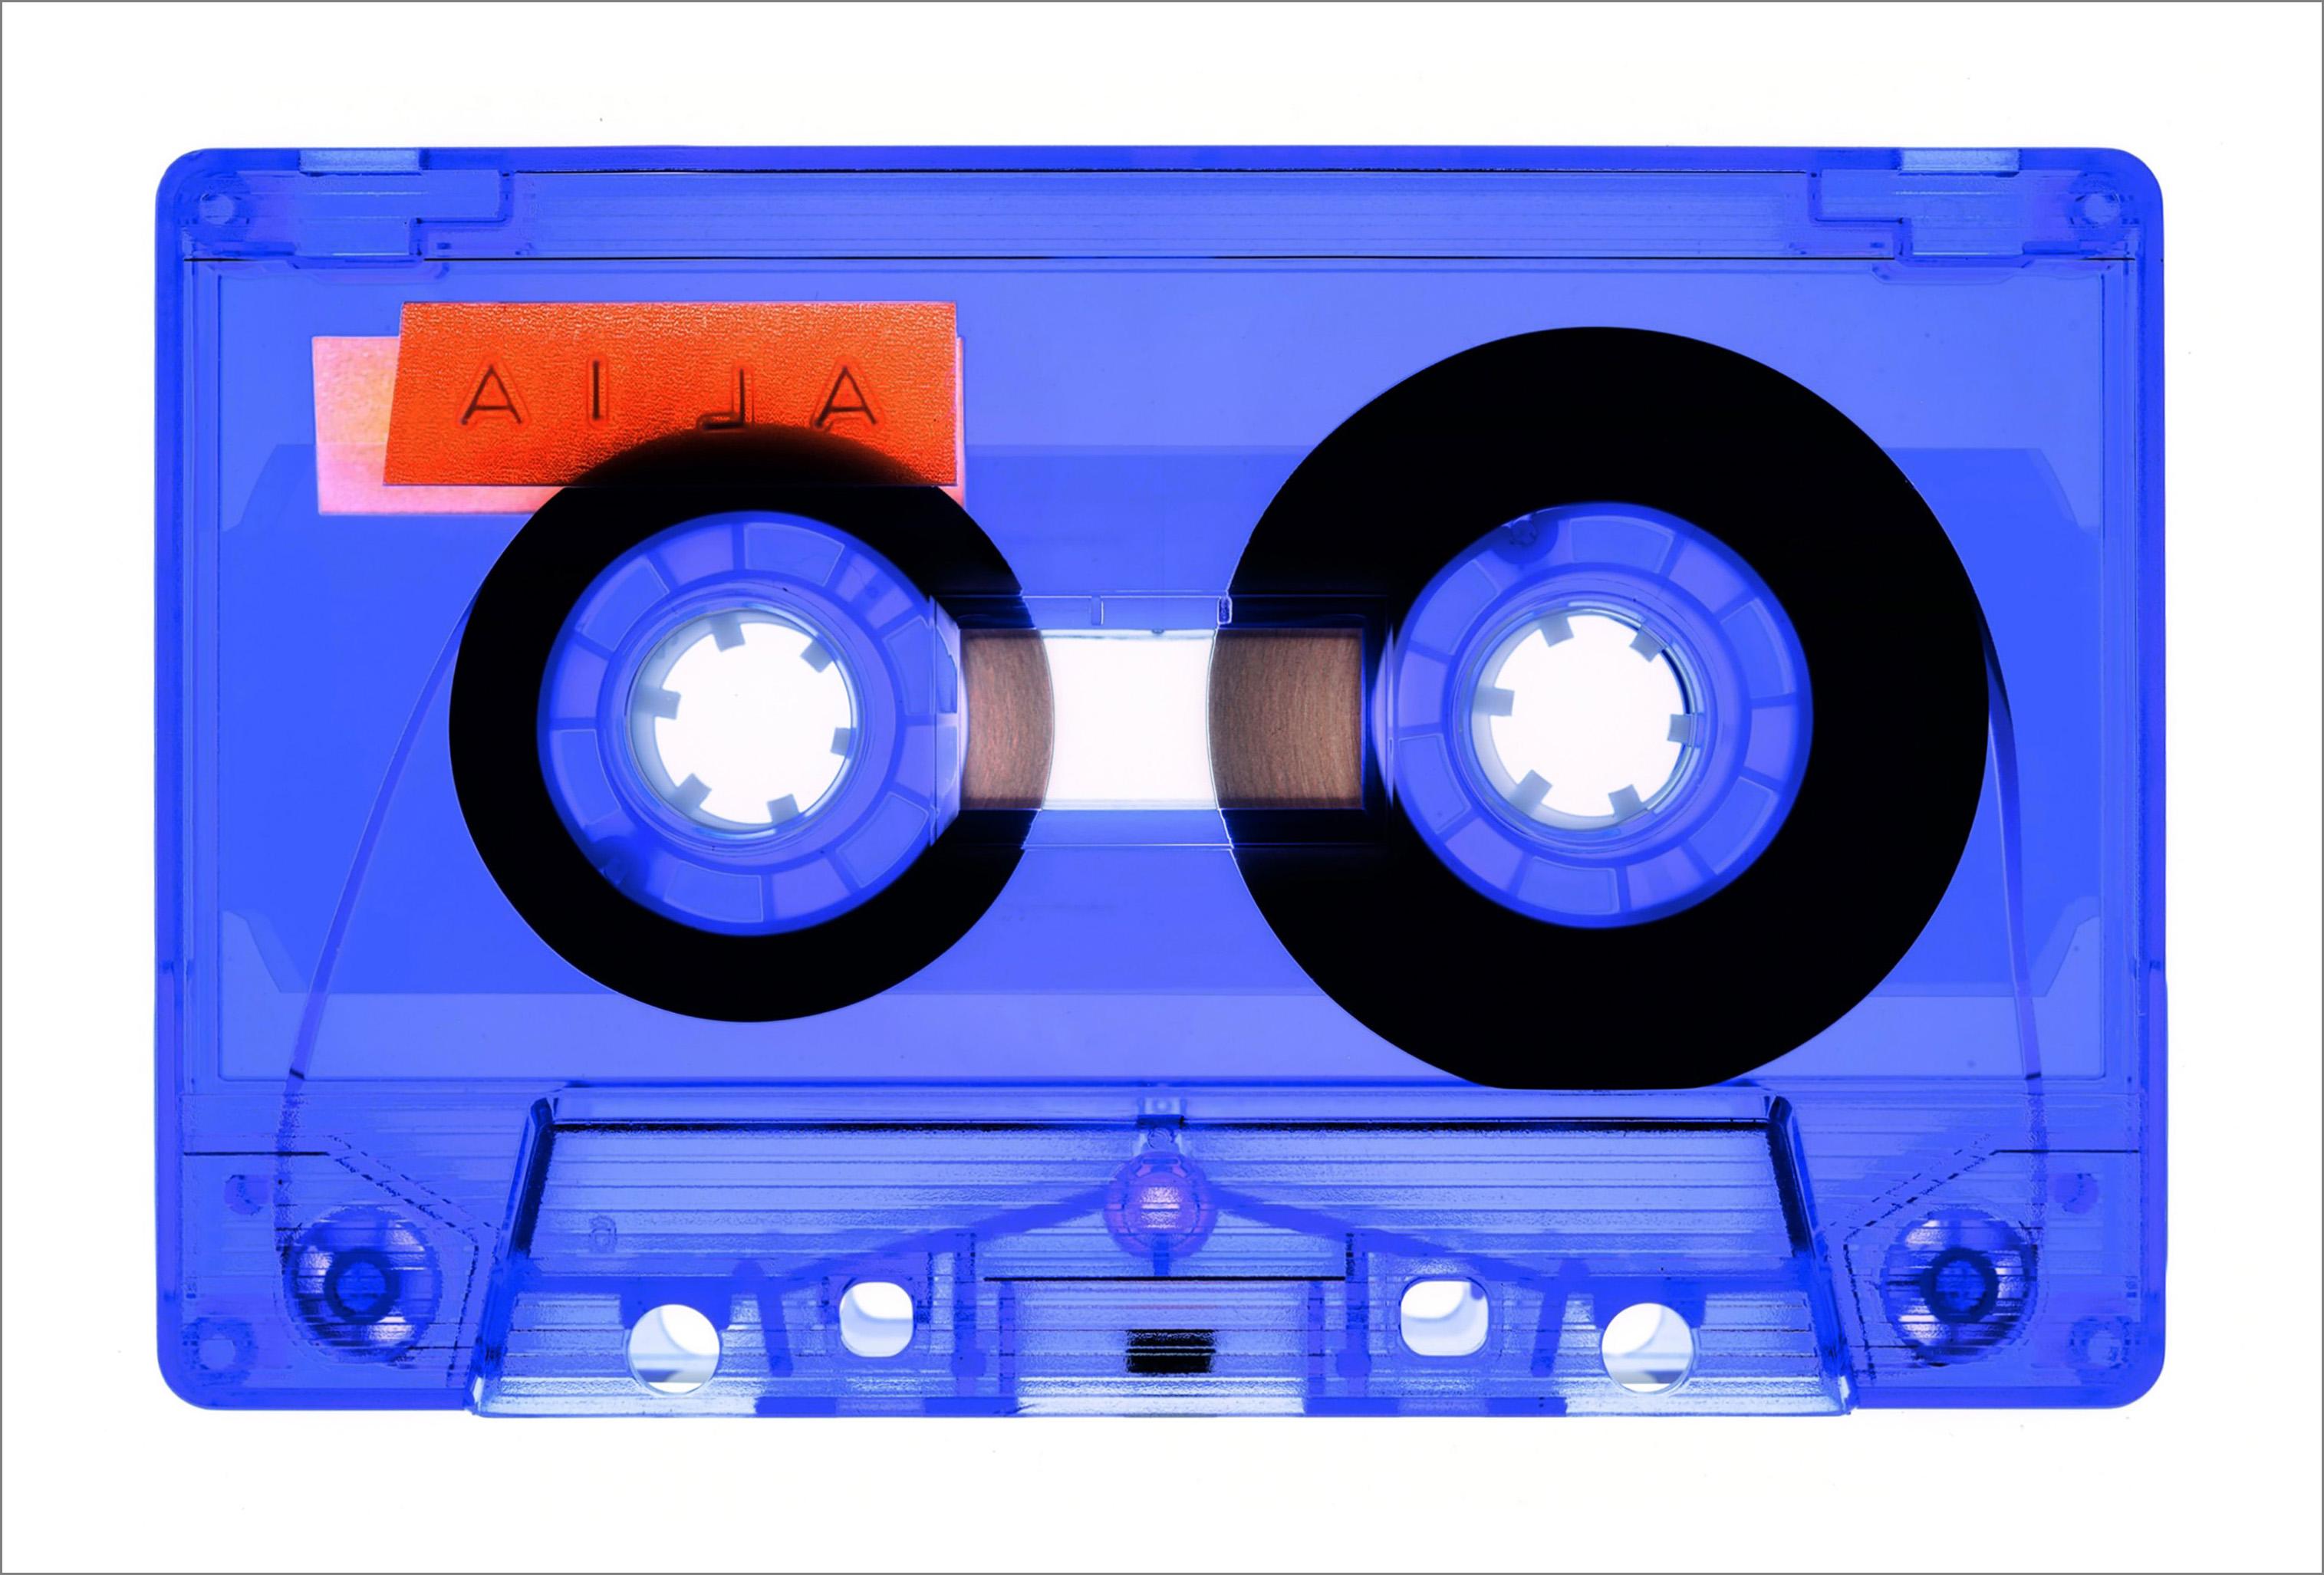 Heidler & Heeps Print - Tape Collection, AILA Blue - Contemporary Pop Art Color Photography